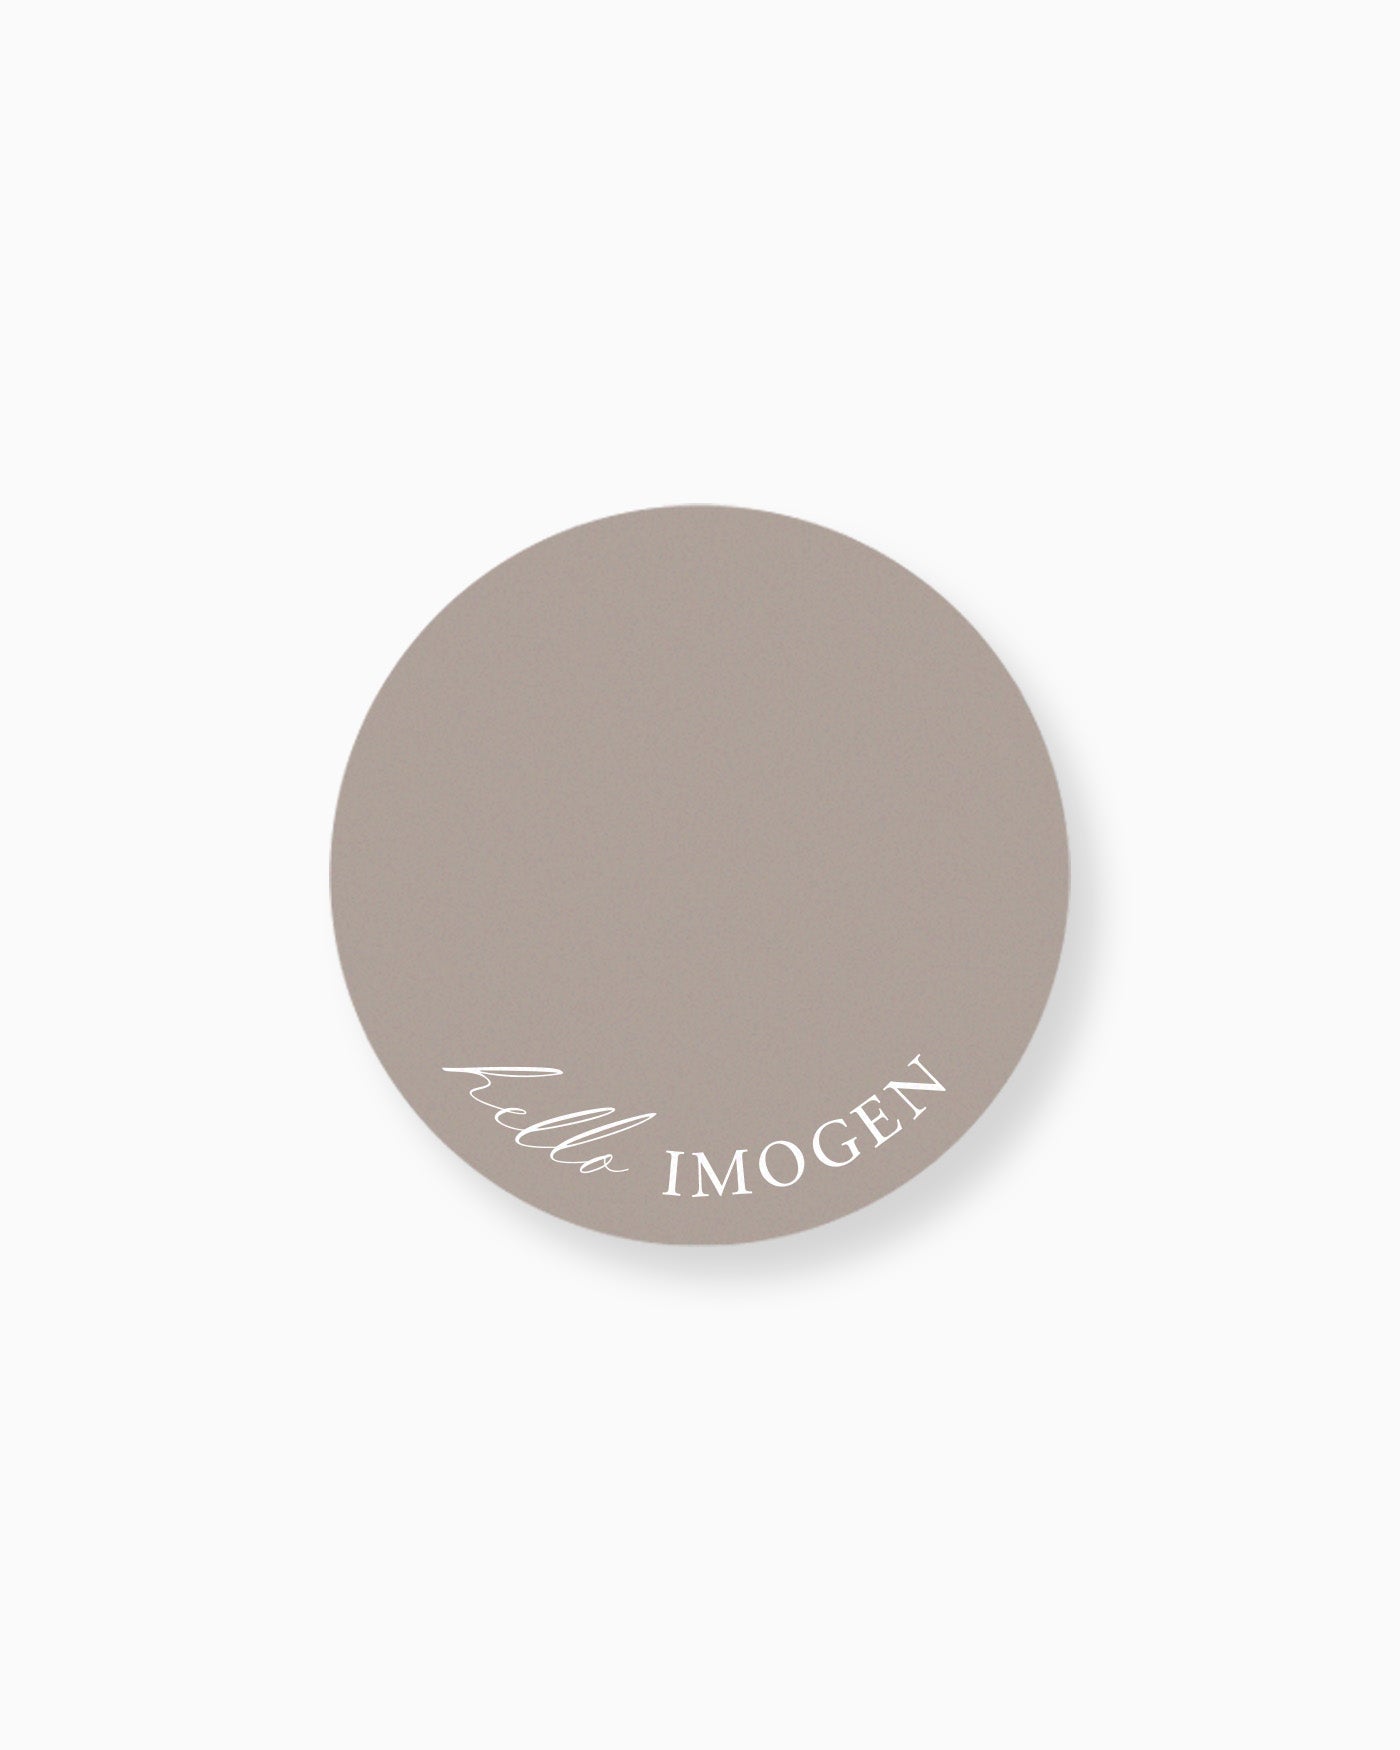 Peppermint Press On the Day Amour Place Card Coaster